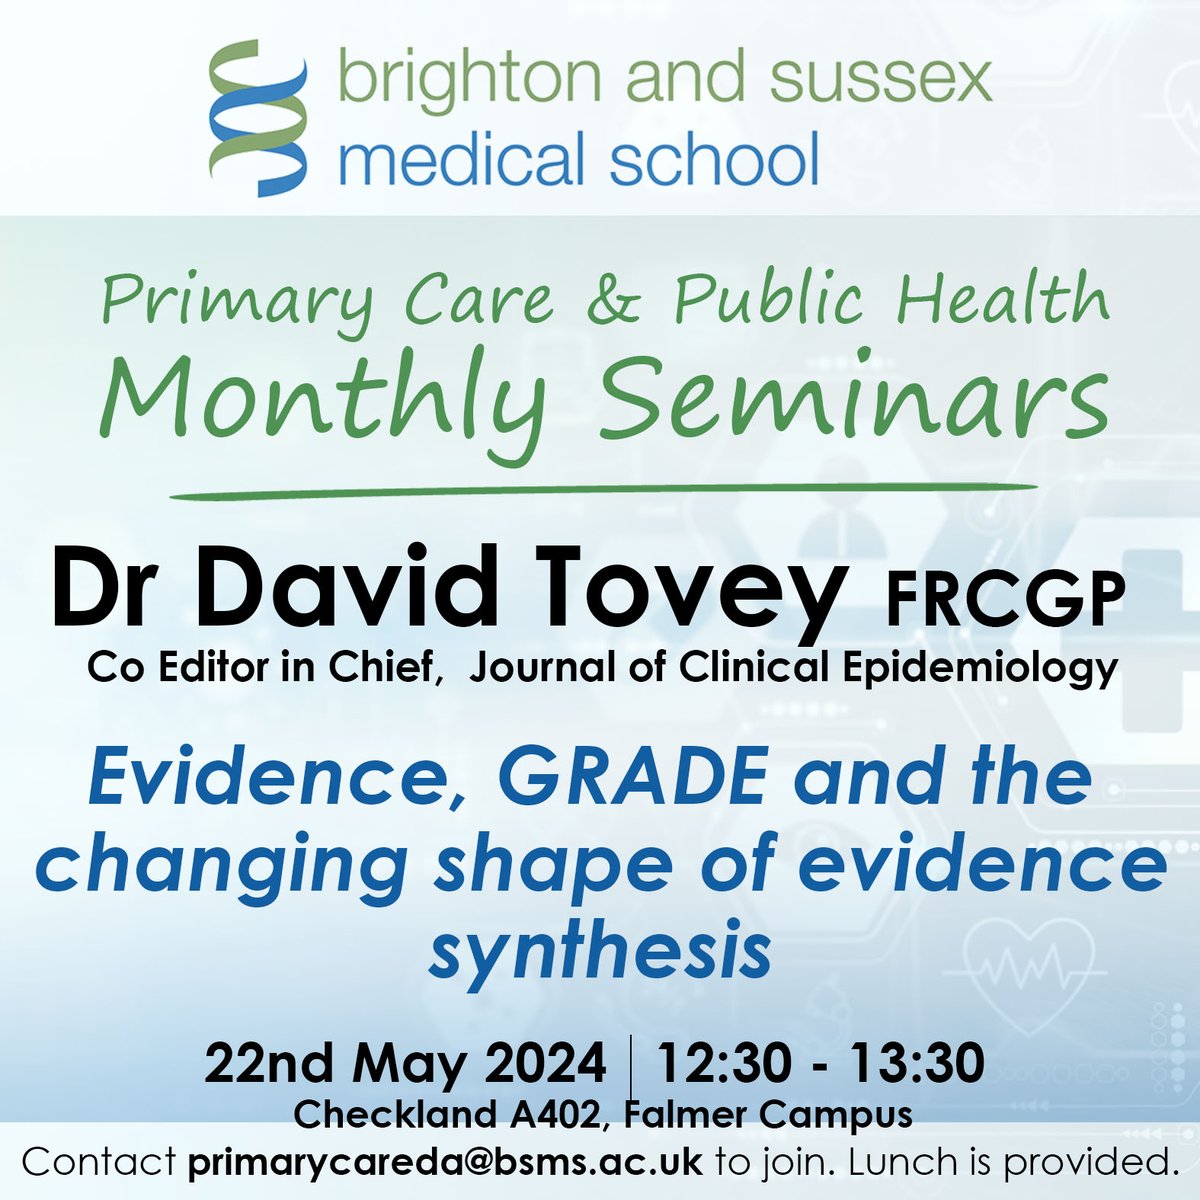 Come along to our next #PCPH seminar with Dr David Tovey FRCGP @DavidTovey, 'Evidence, GRADE and the changing shape of evidence synthesis’. All welcome. Contact primarycareDA@bsms.ac.uk to attend.